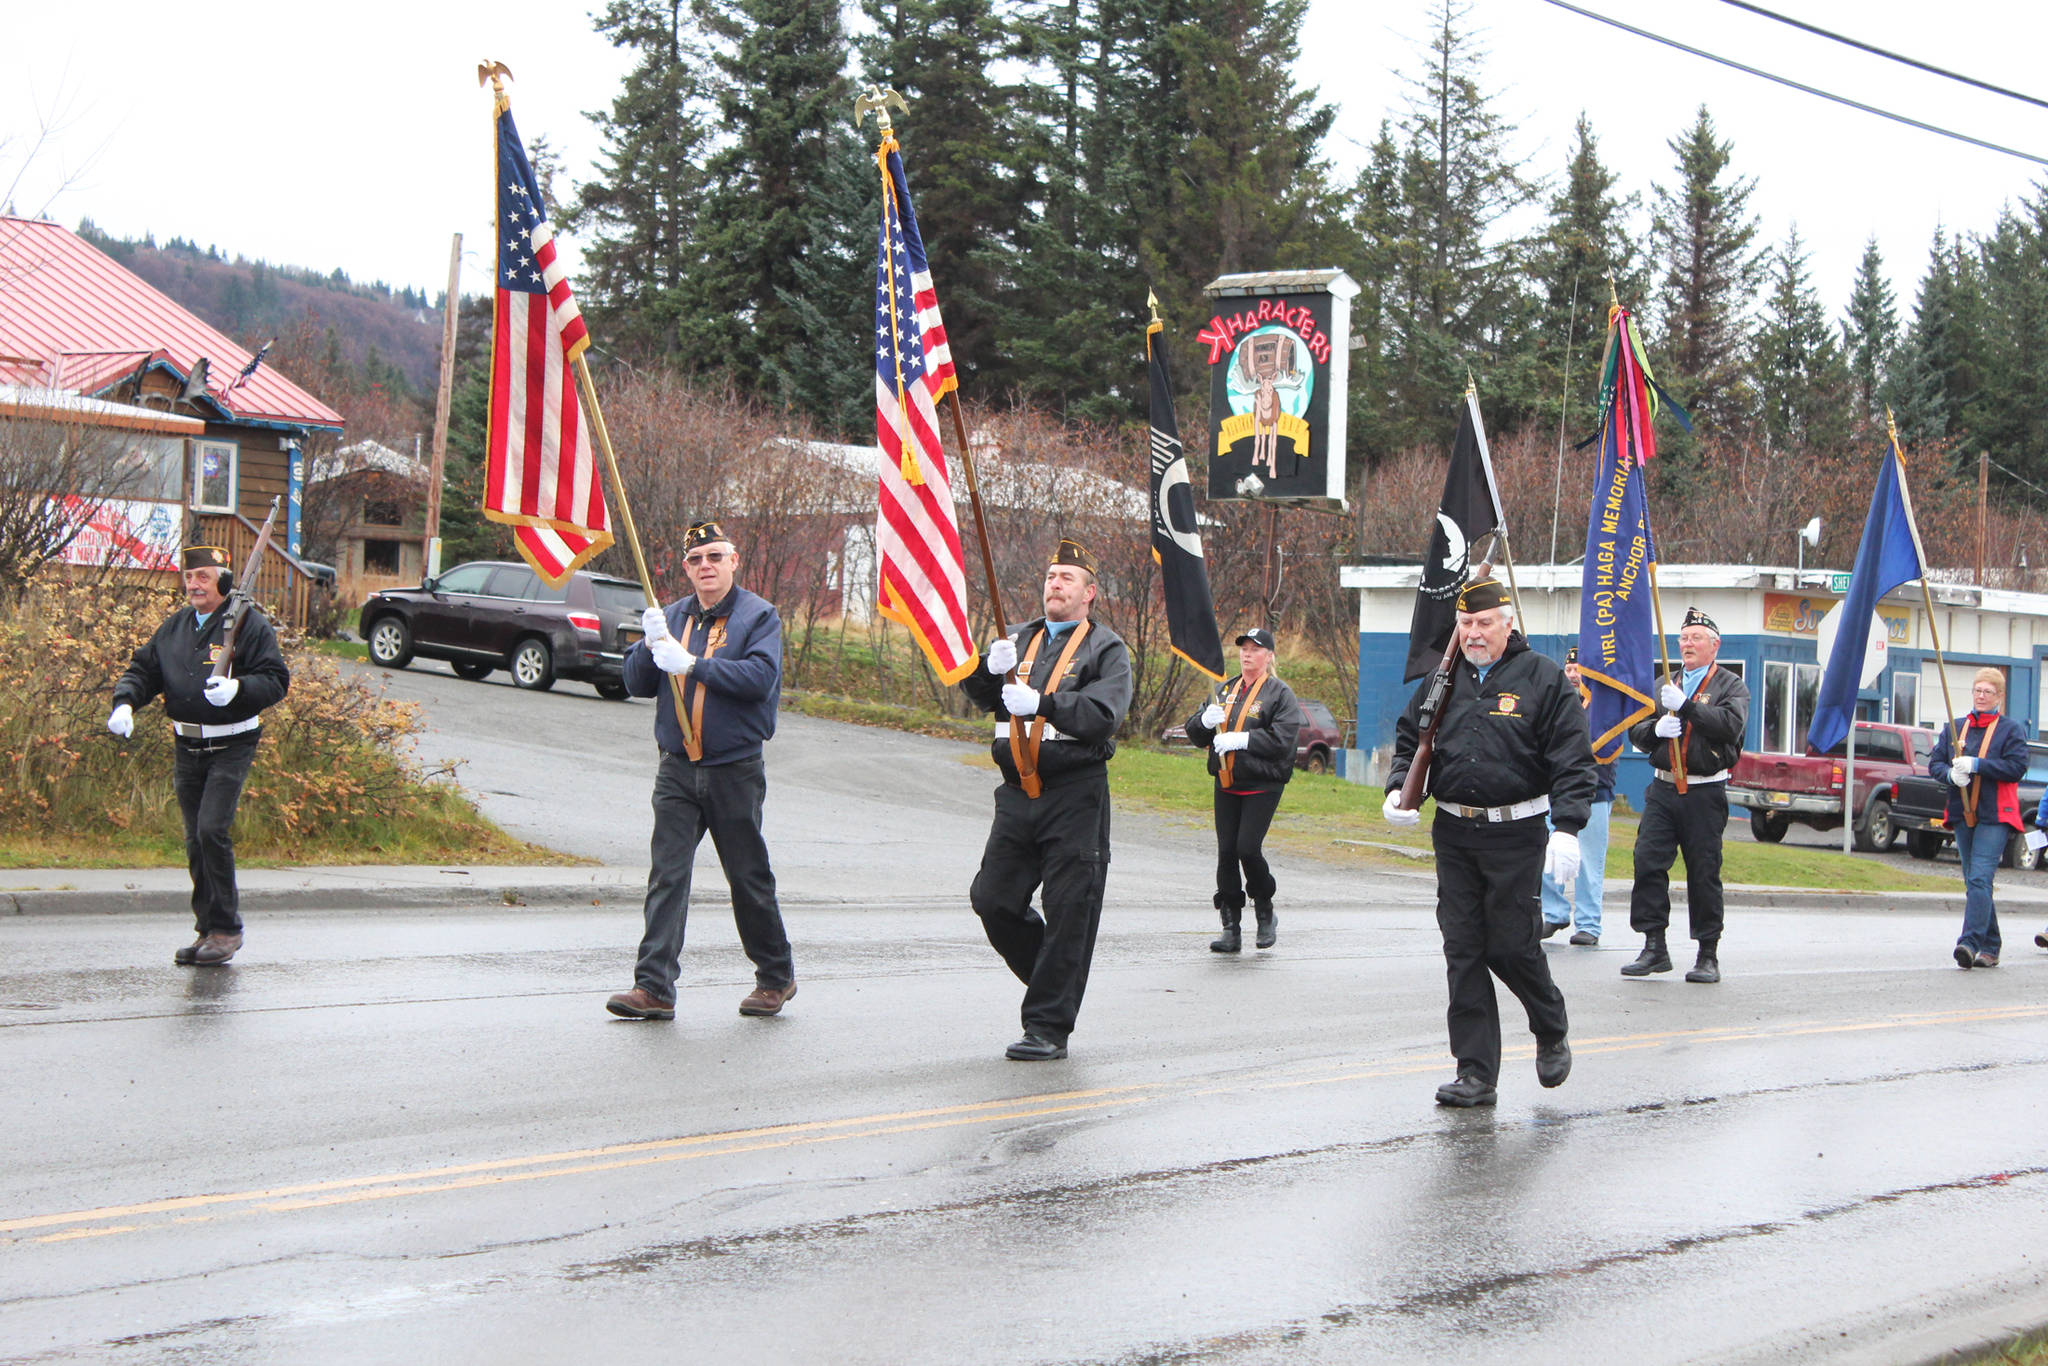 Members of veterans organizations march down Pioneer Avenue during in a Veterans Day parade Sunday, Nov. 11, 2018 in Homer, Alaska. (Photo by Megan Pacer/Homer News)